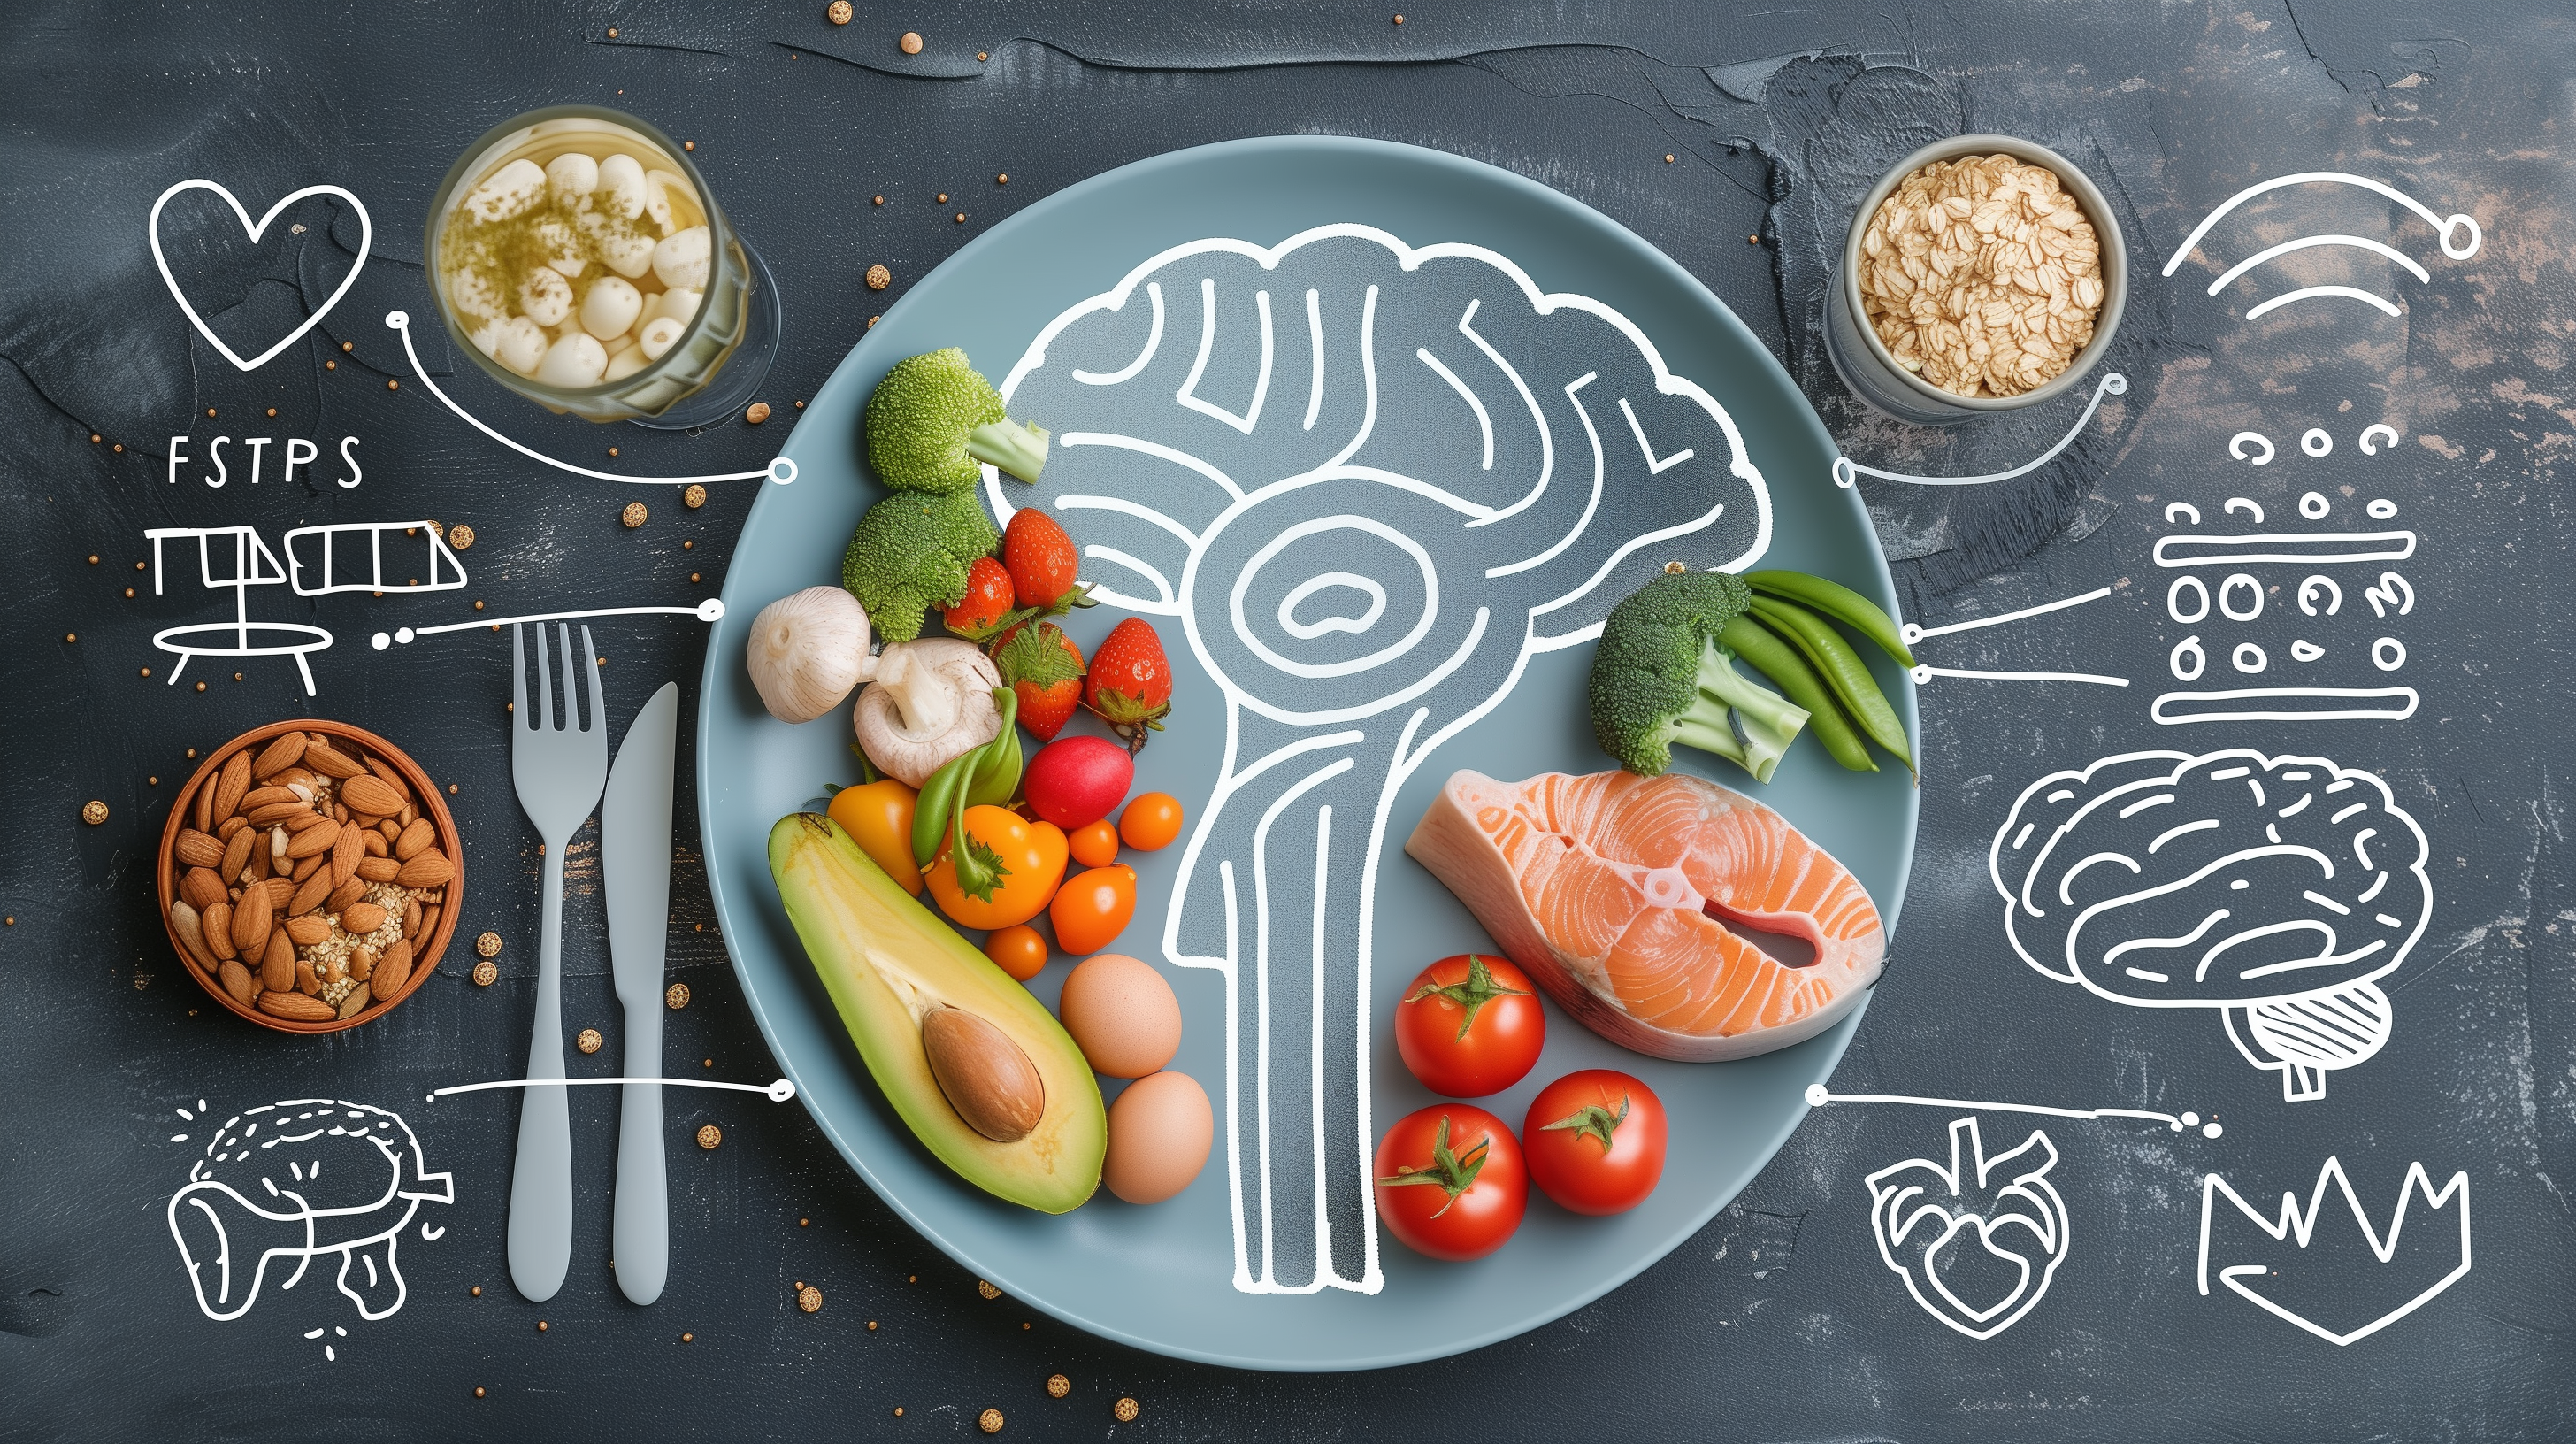 plate divided into sections with fruits, vegetables, whole grains, lean protein, and a side glass of water, surrounded by icons of a heart, muscle, and brain